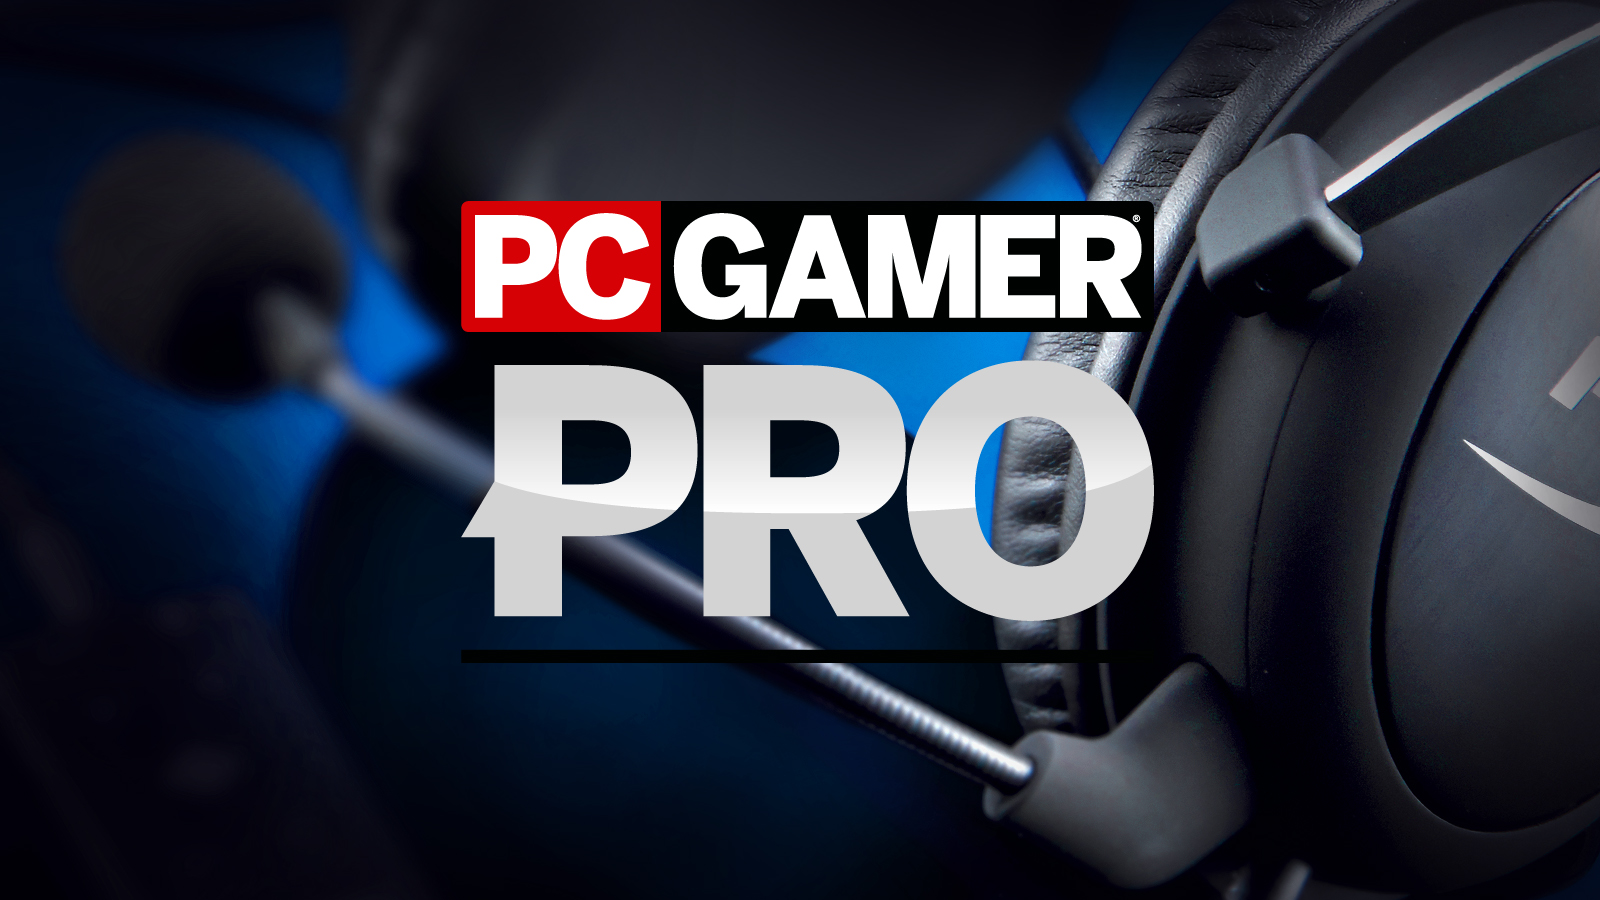 Welcome to PC Gamer Pro